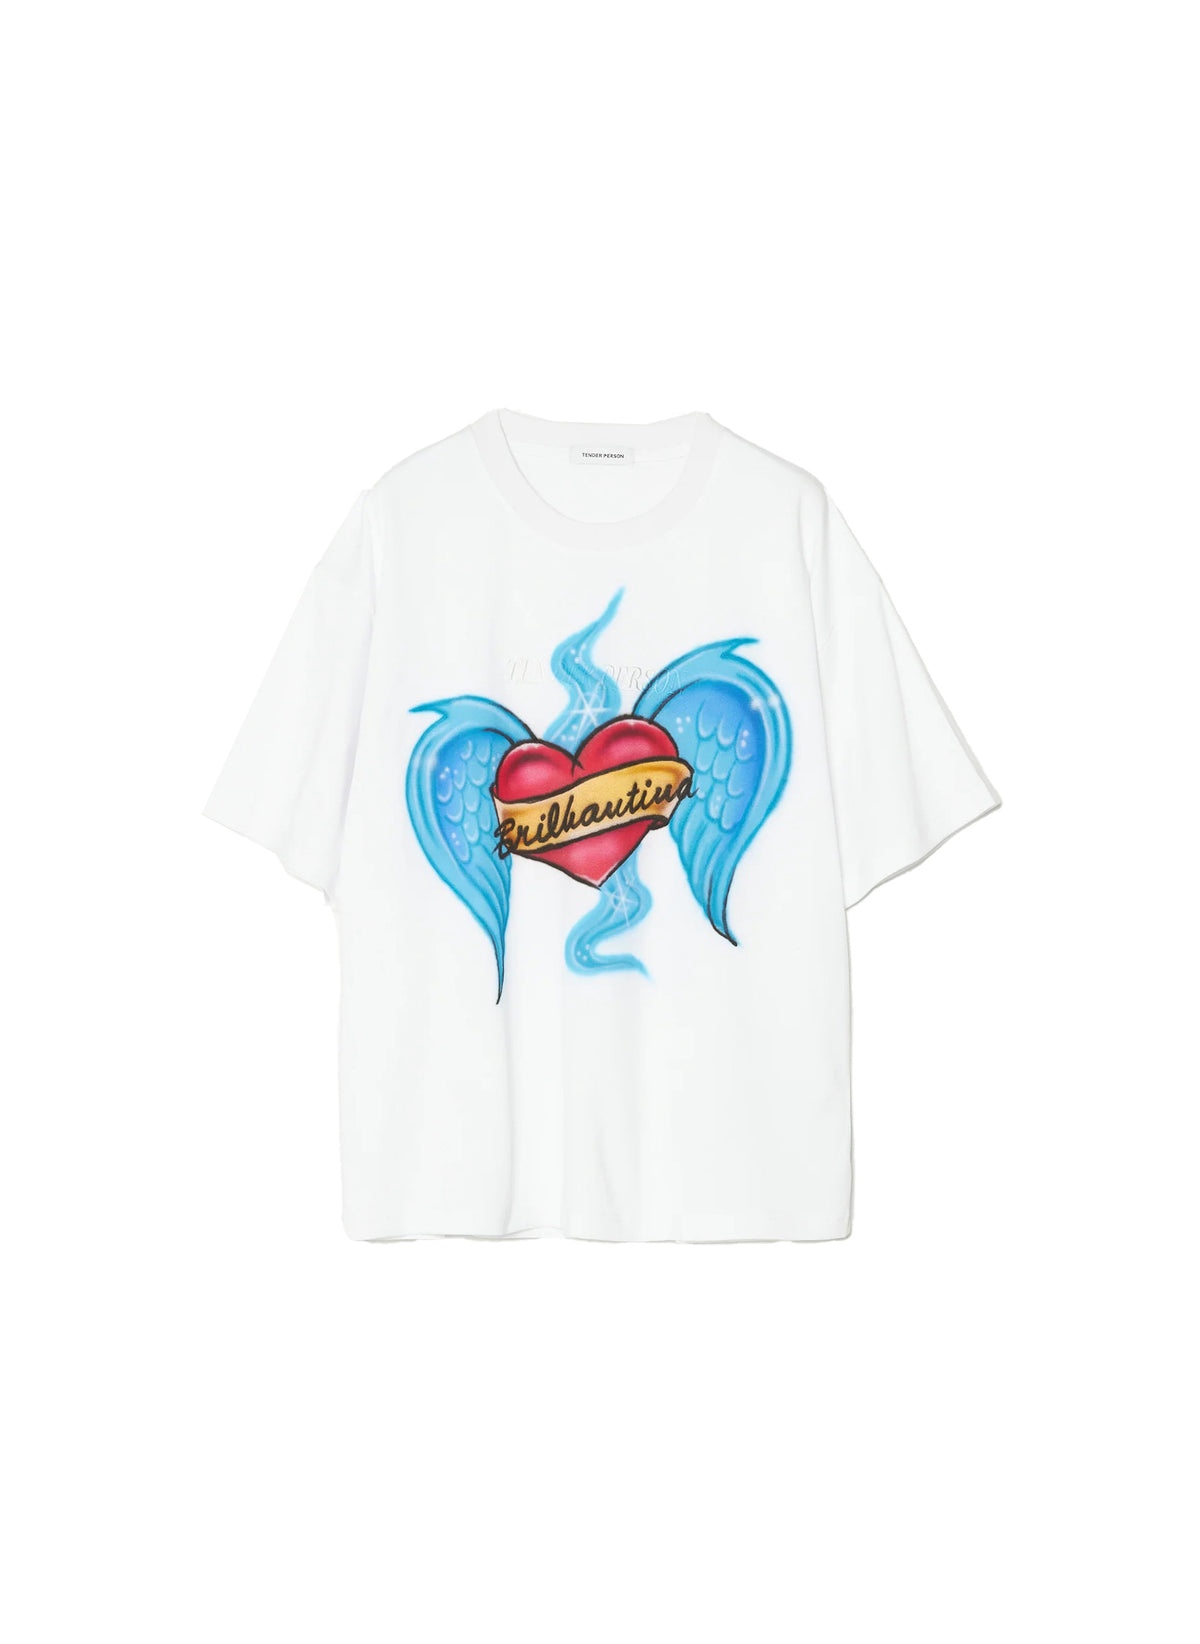 TENDER PERSON / AIRBRUSHED ROCK HEART T WHITE